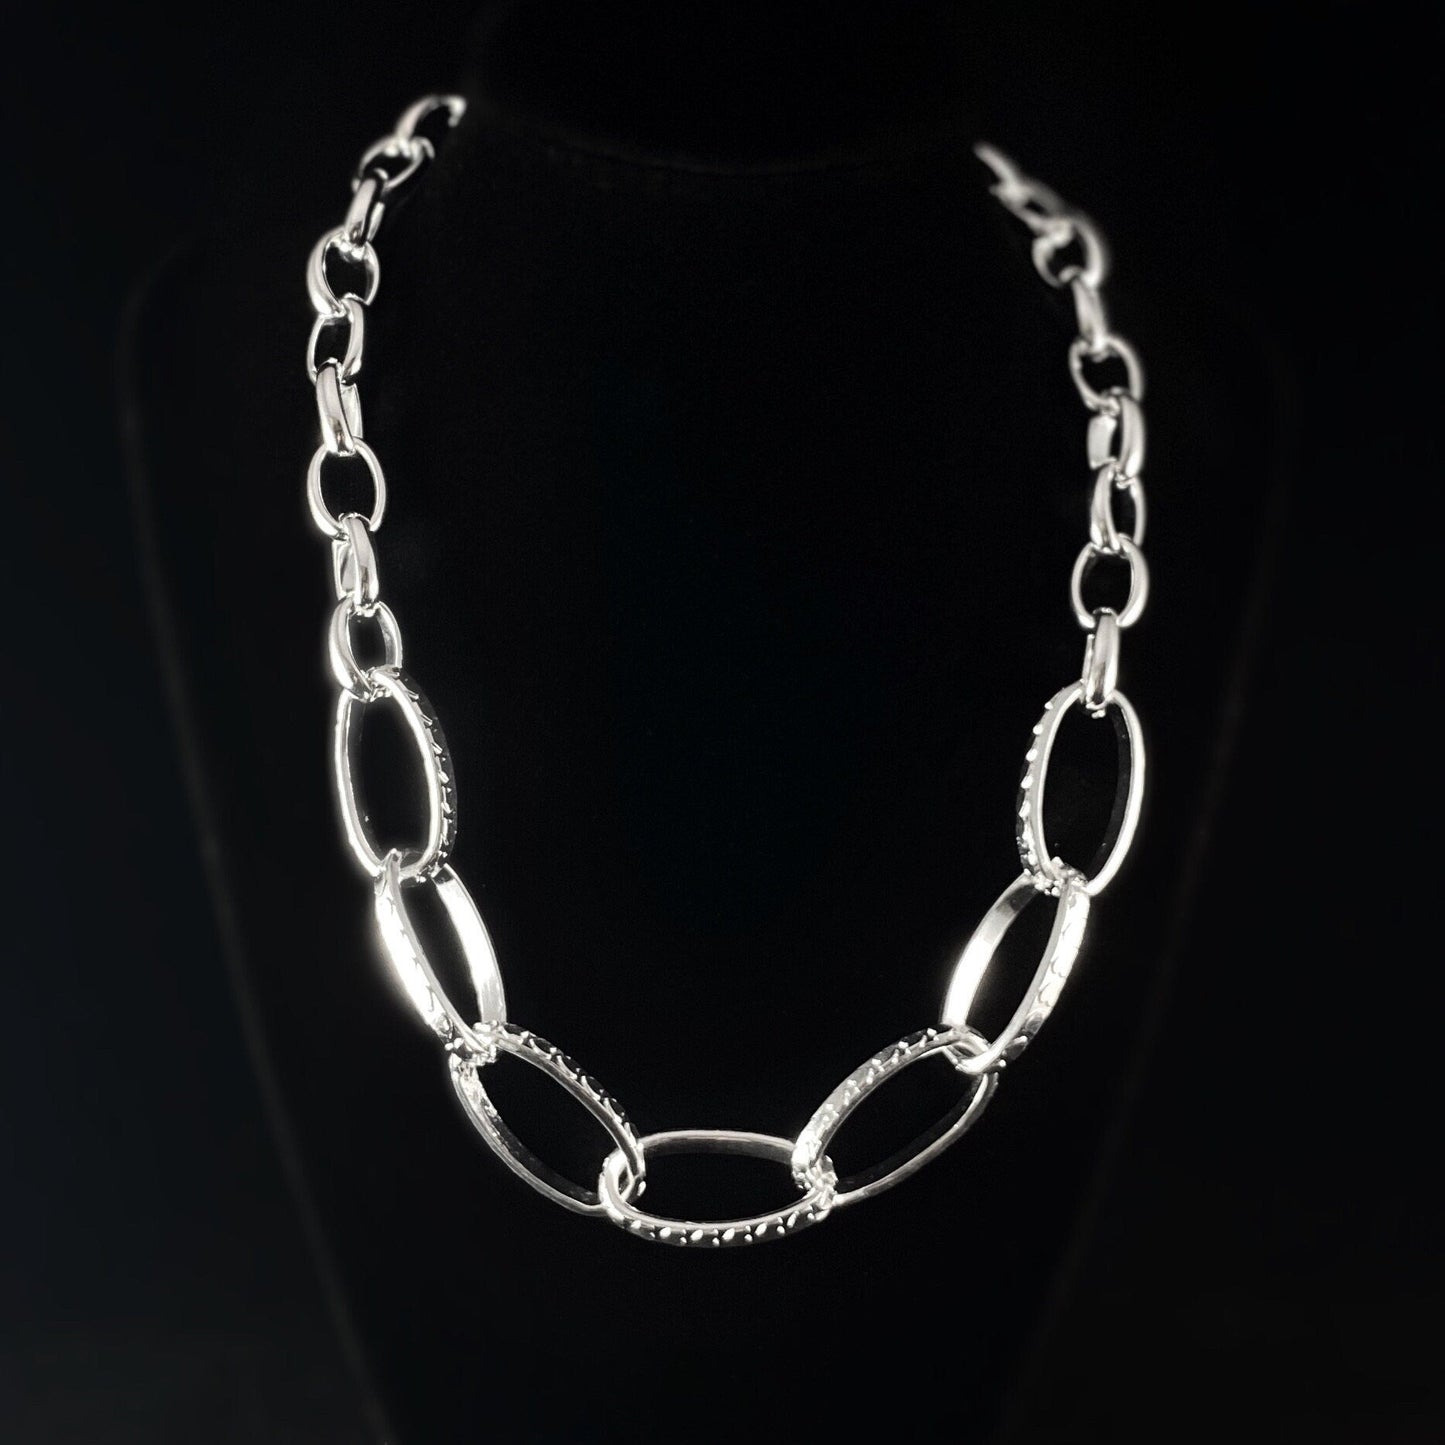 Chunky Silver Chain Necklace with Tiny Heart Detailing - Handmade Nickel Free Ulla Jewelry